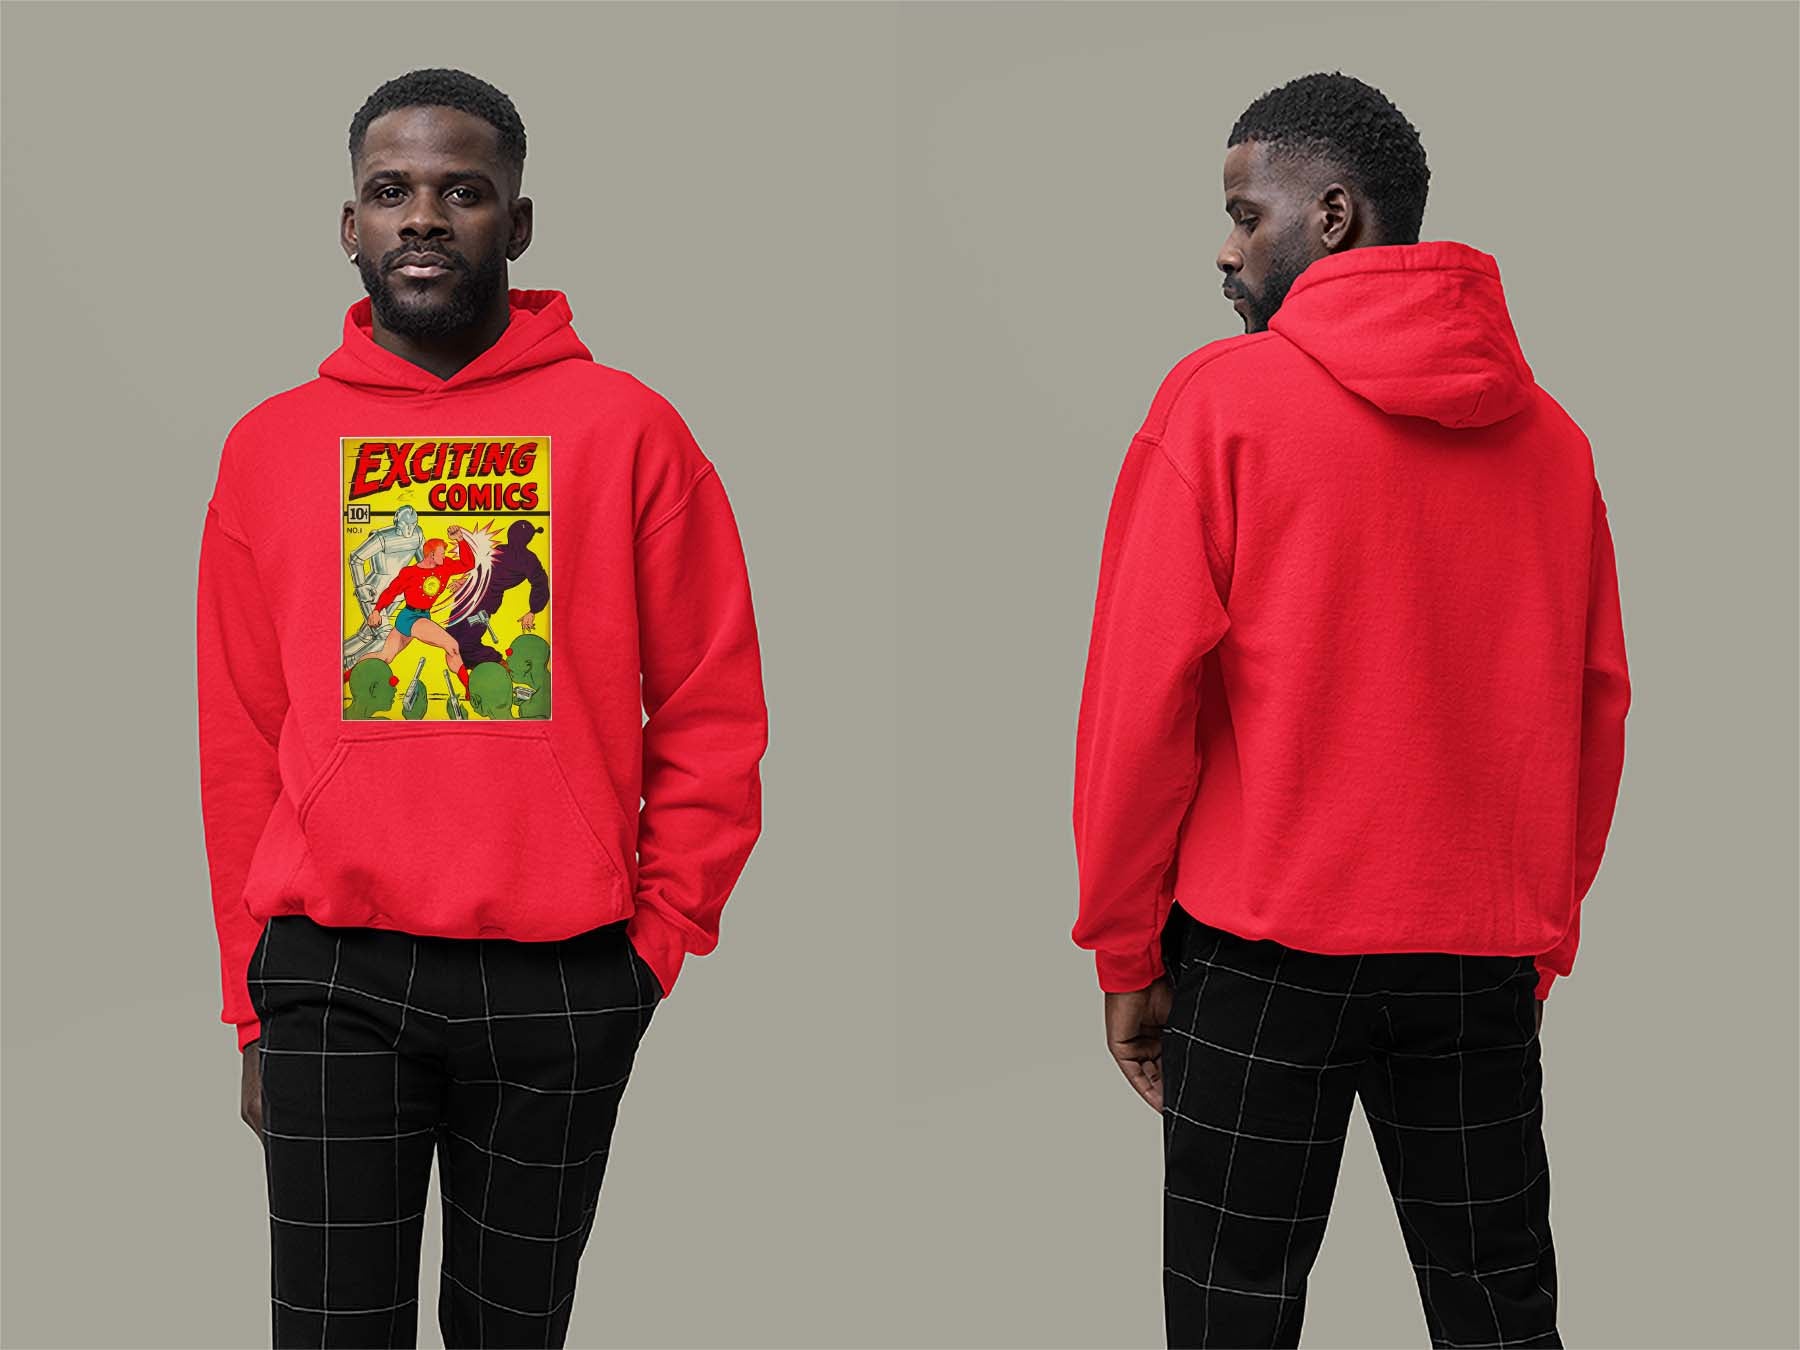 Exciting Comics No.1 Hoodie Small Red